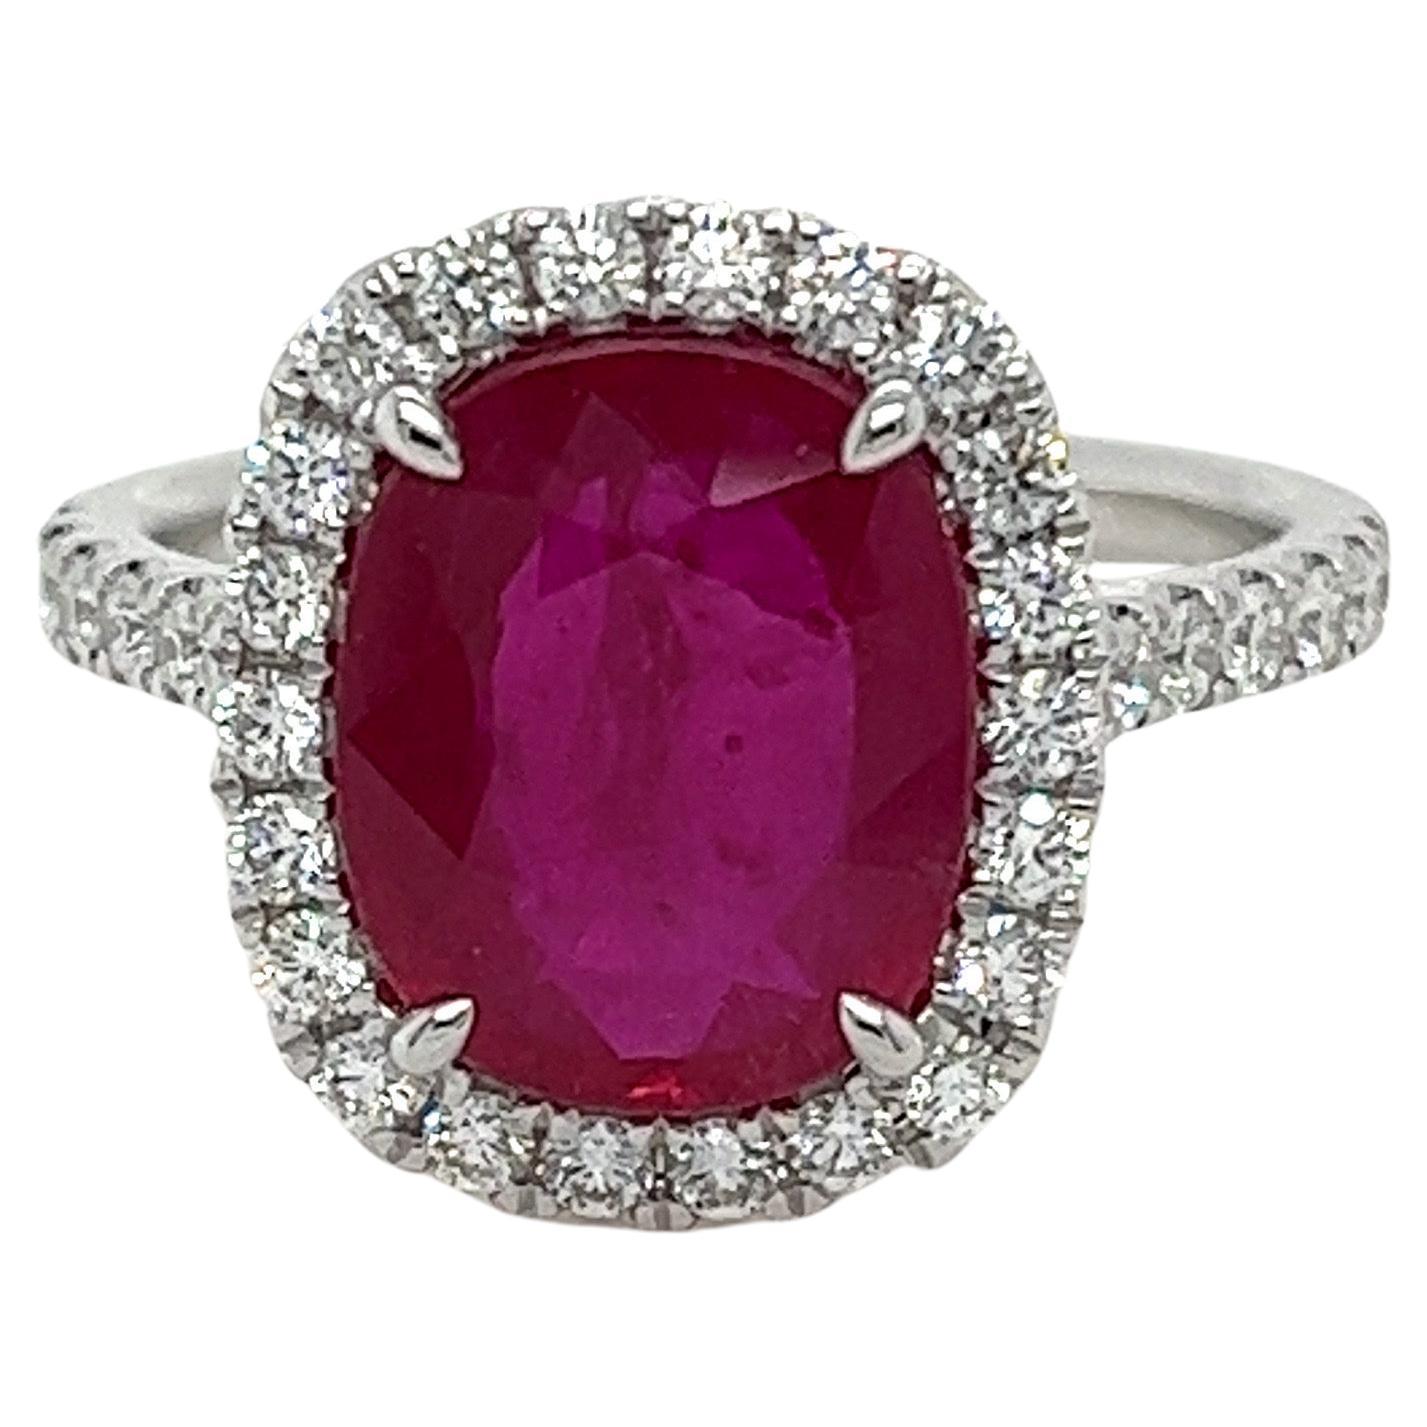 Certified Mozambique Ruby & Diamond Halo Ring in 18 Karat White Gold